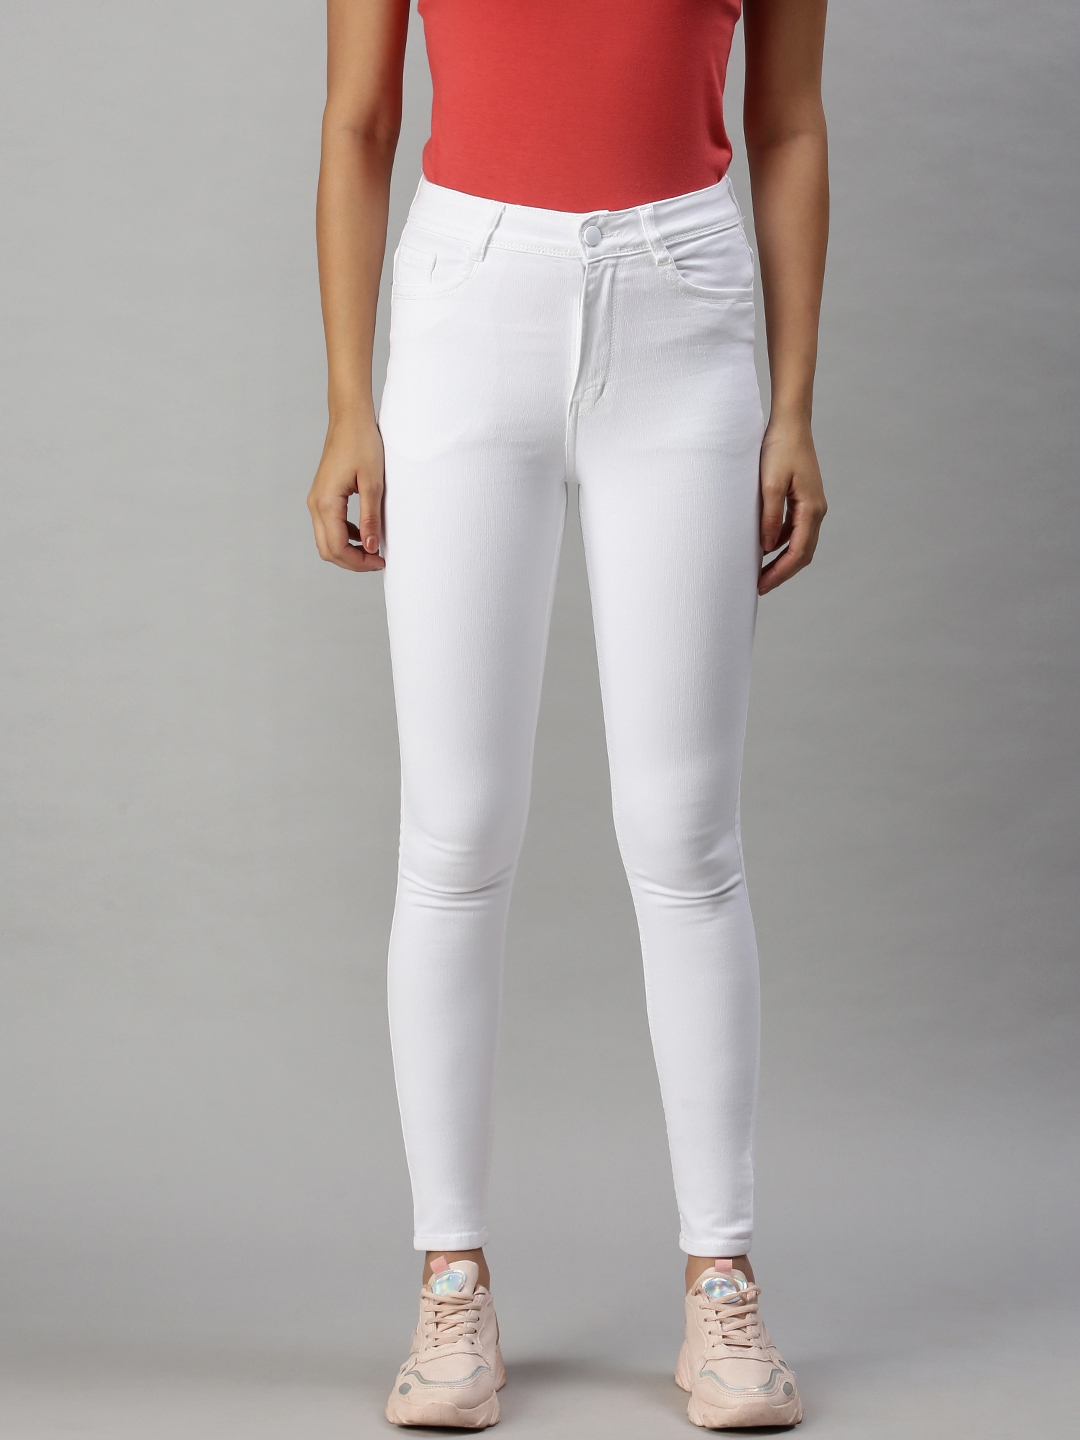 SHOWOFF Women's Casual Skinny Fit High-Rise White Jeans